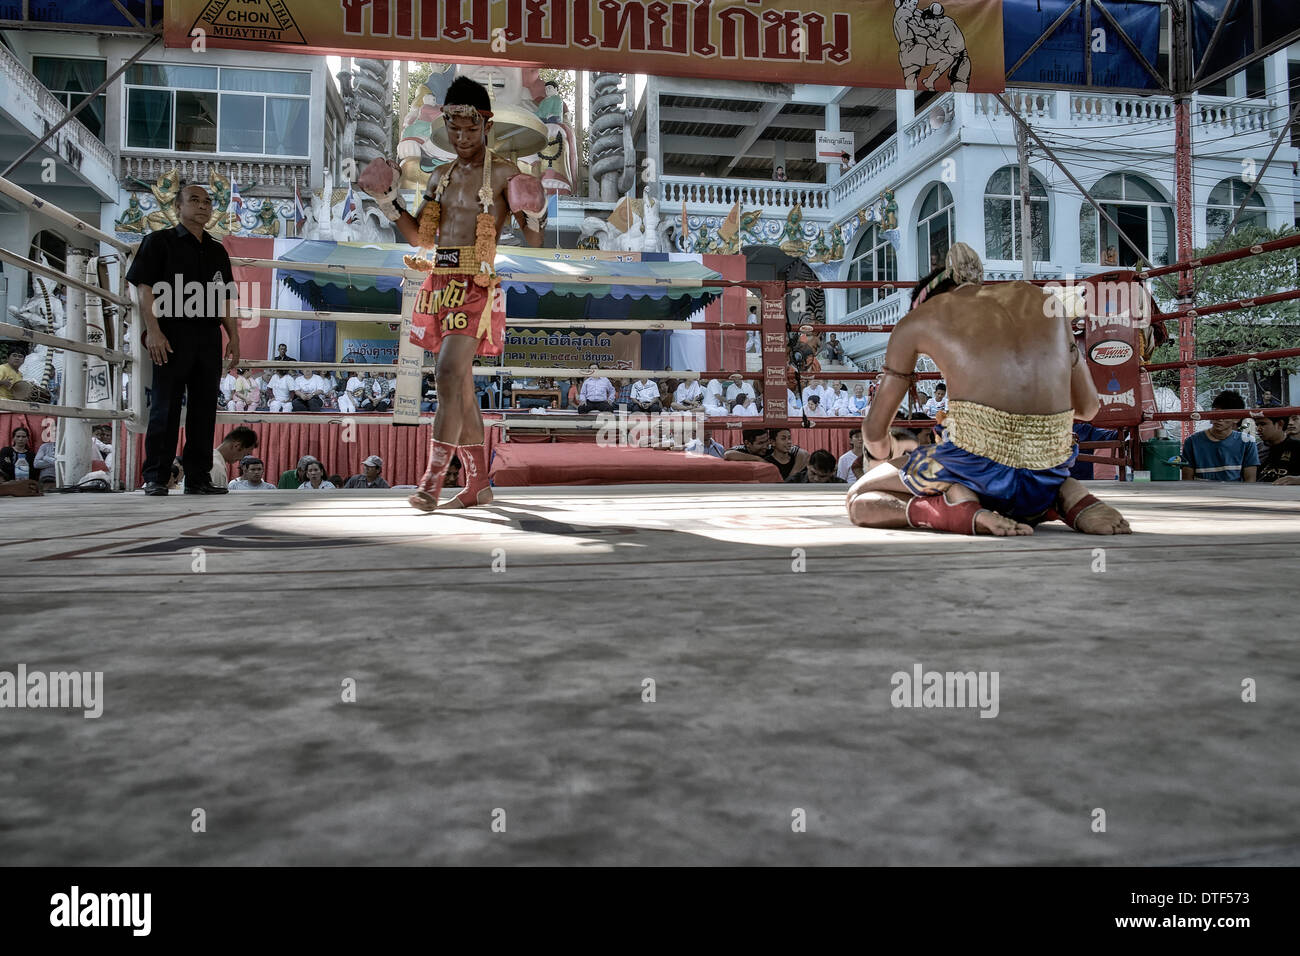 Muay Thai kick boxers performing pre-fight ritual of respect, guidance and safe keeping. Thailand S. E. Asia Stock Photo